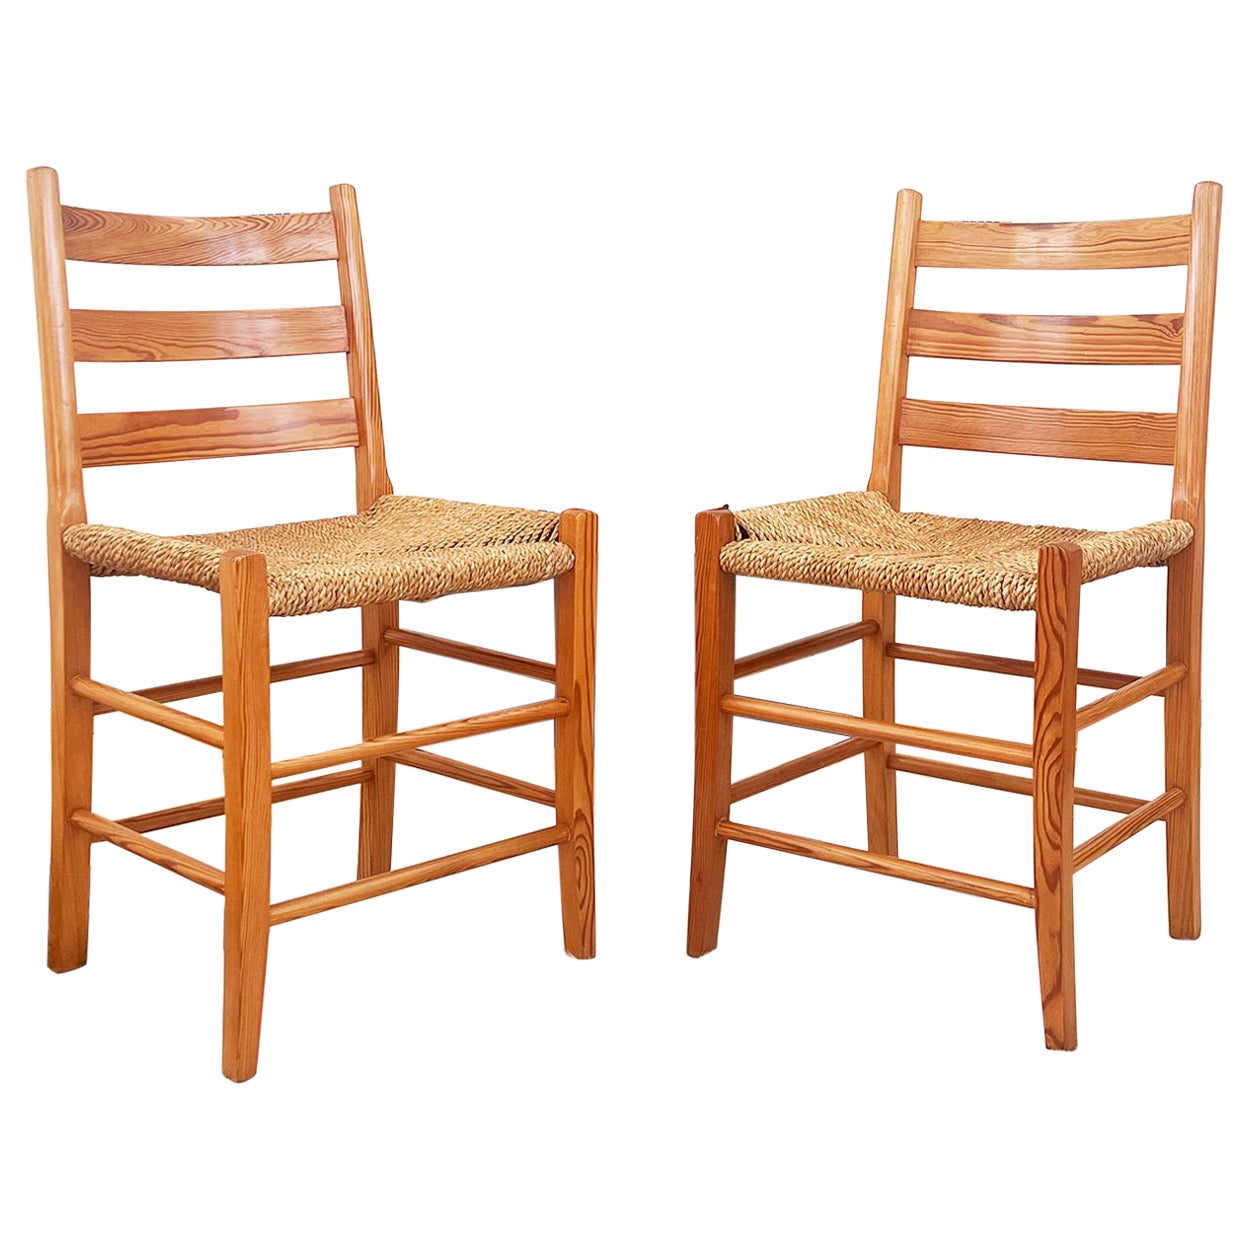 Swedish 1970s Pine Ladder back Chairs with Rope woven seats -- Pair